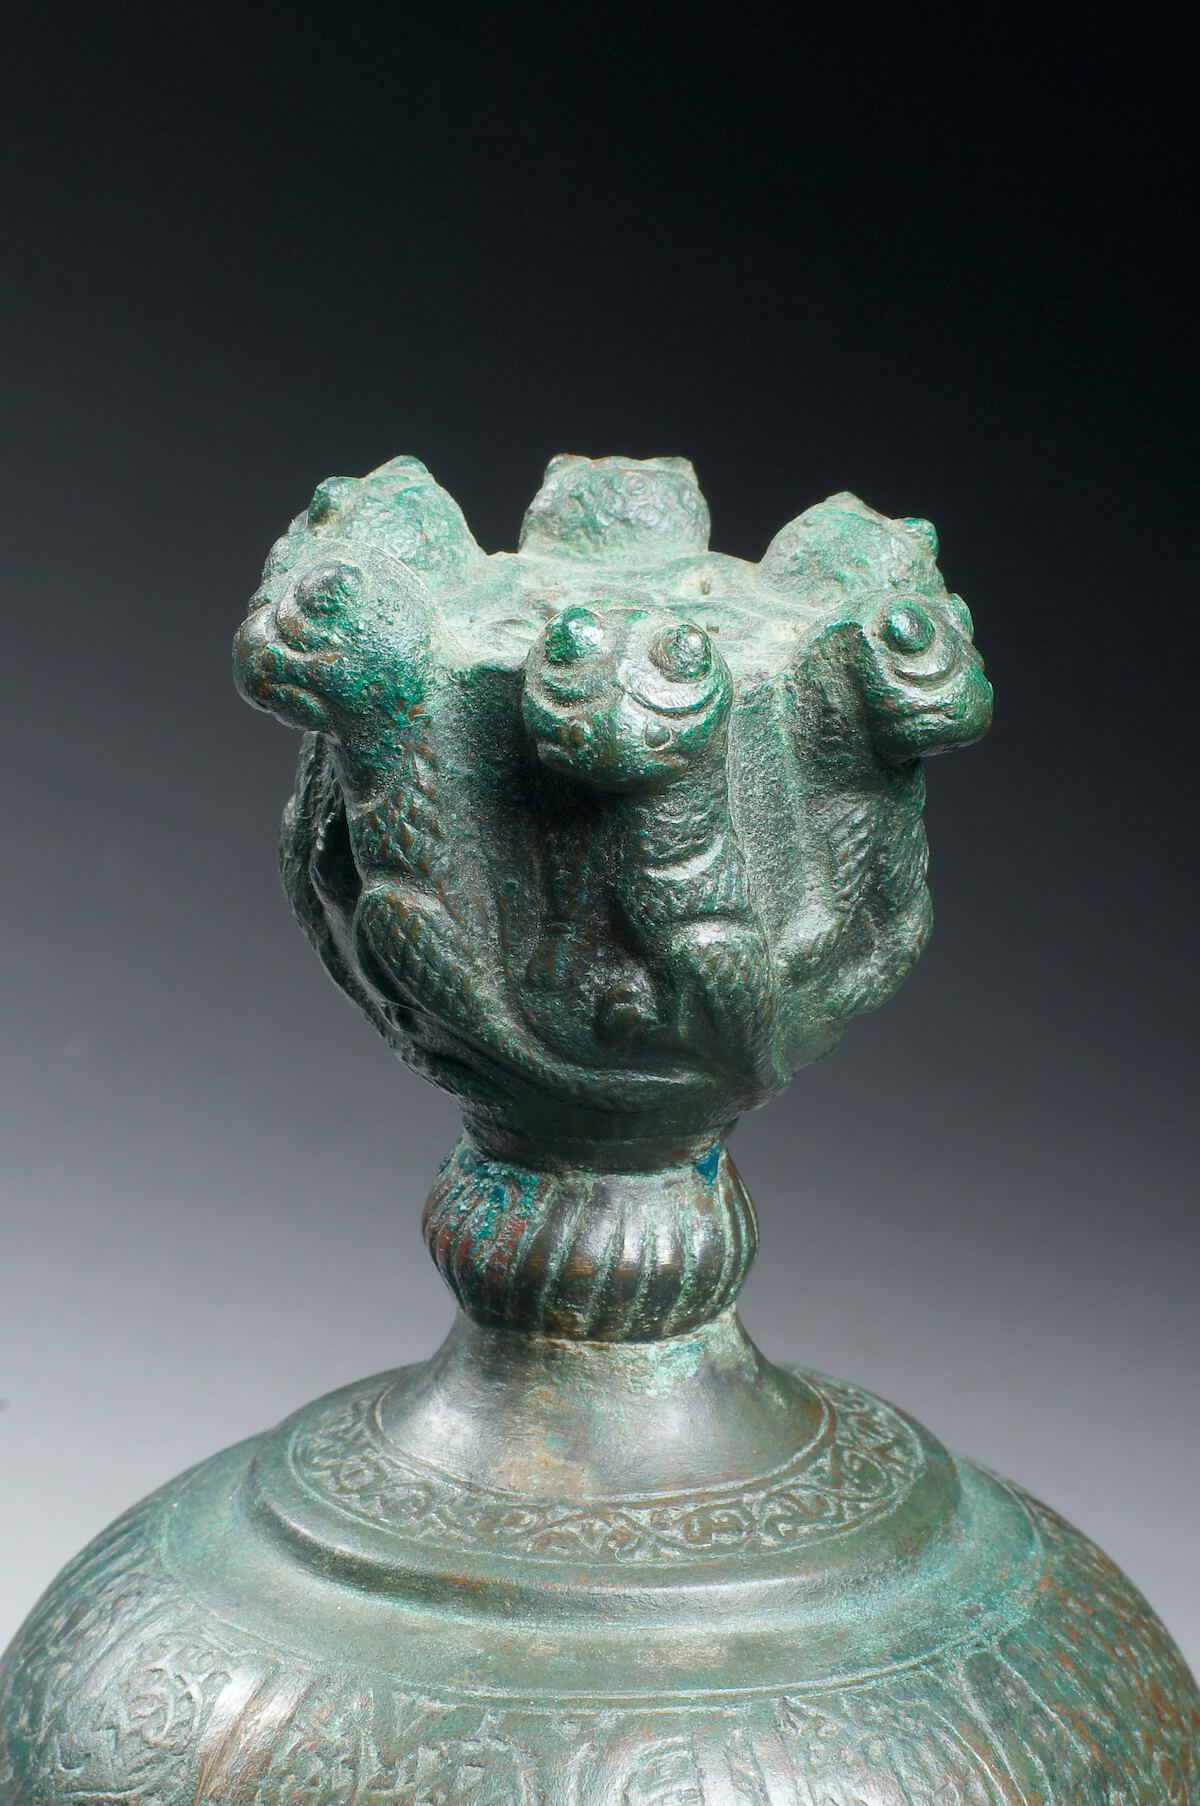 Bronze rosewater sprinkler with lions, inscriptions and panels enclosing animals (detail of the mouth with lions)